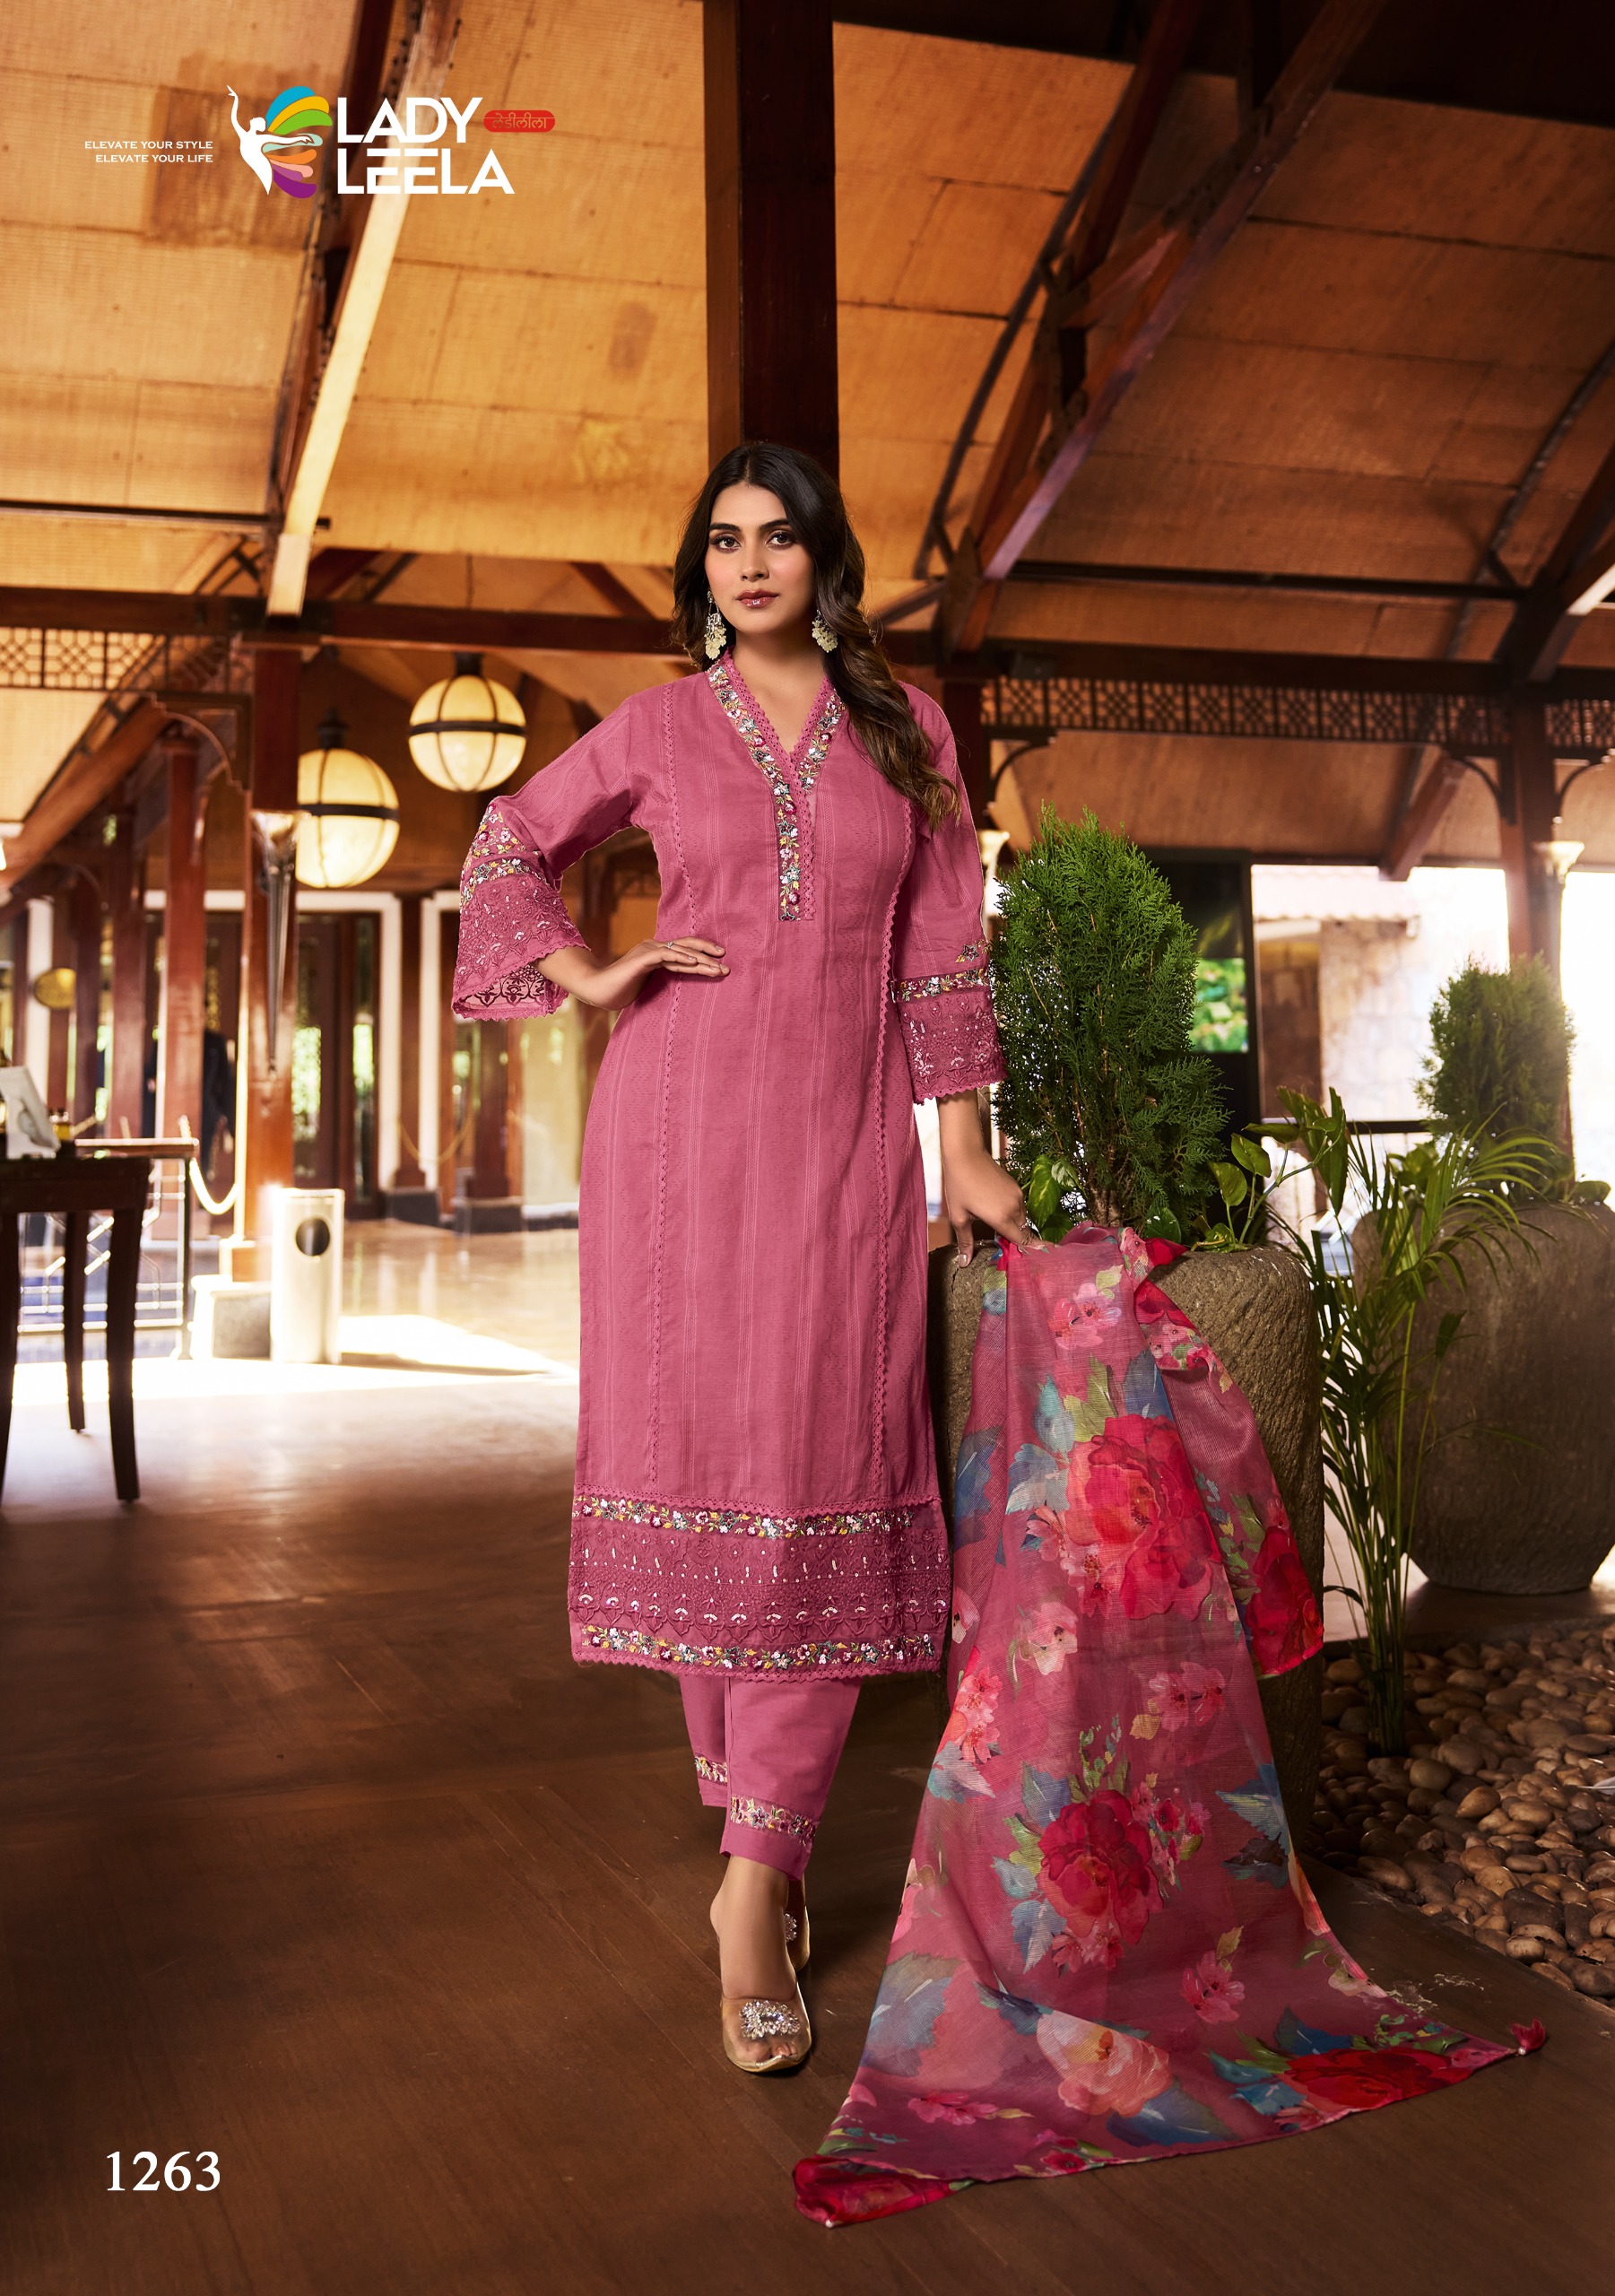 Lady Leela Summer Trends collection 6